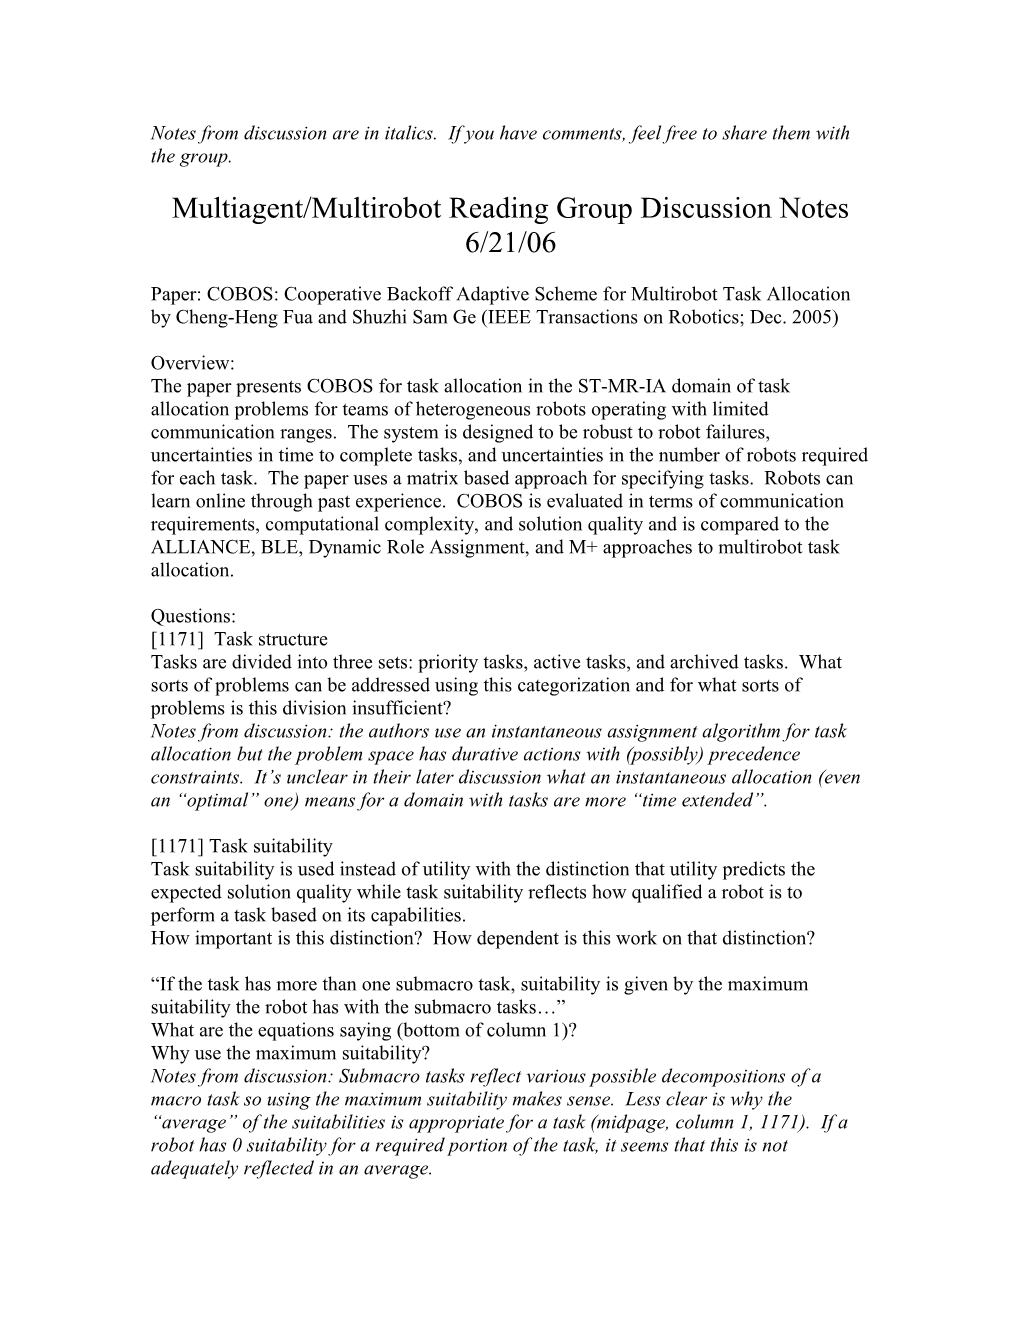 Multiagent/Multirobot Reading Group Discussion Notes 6/21/06